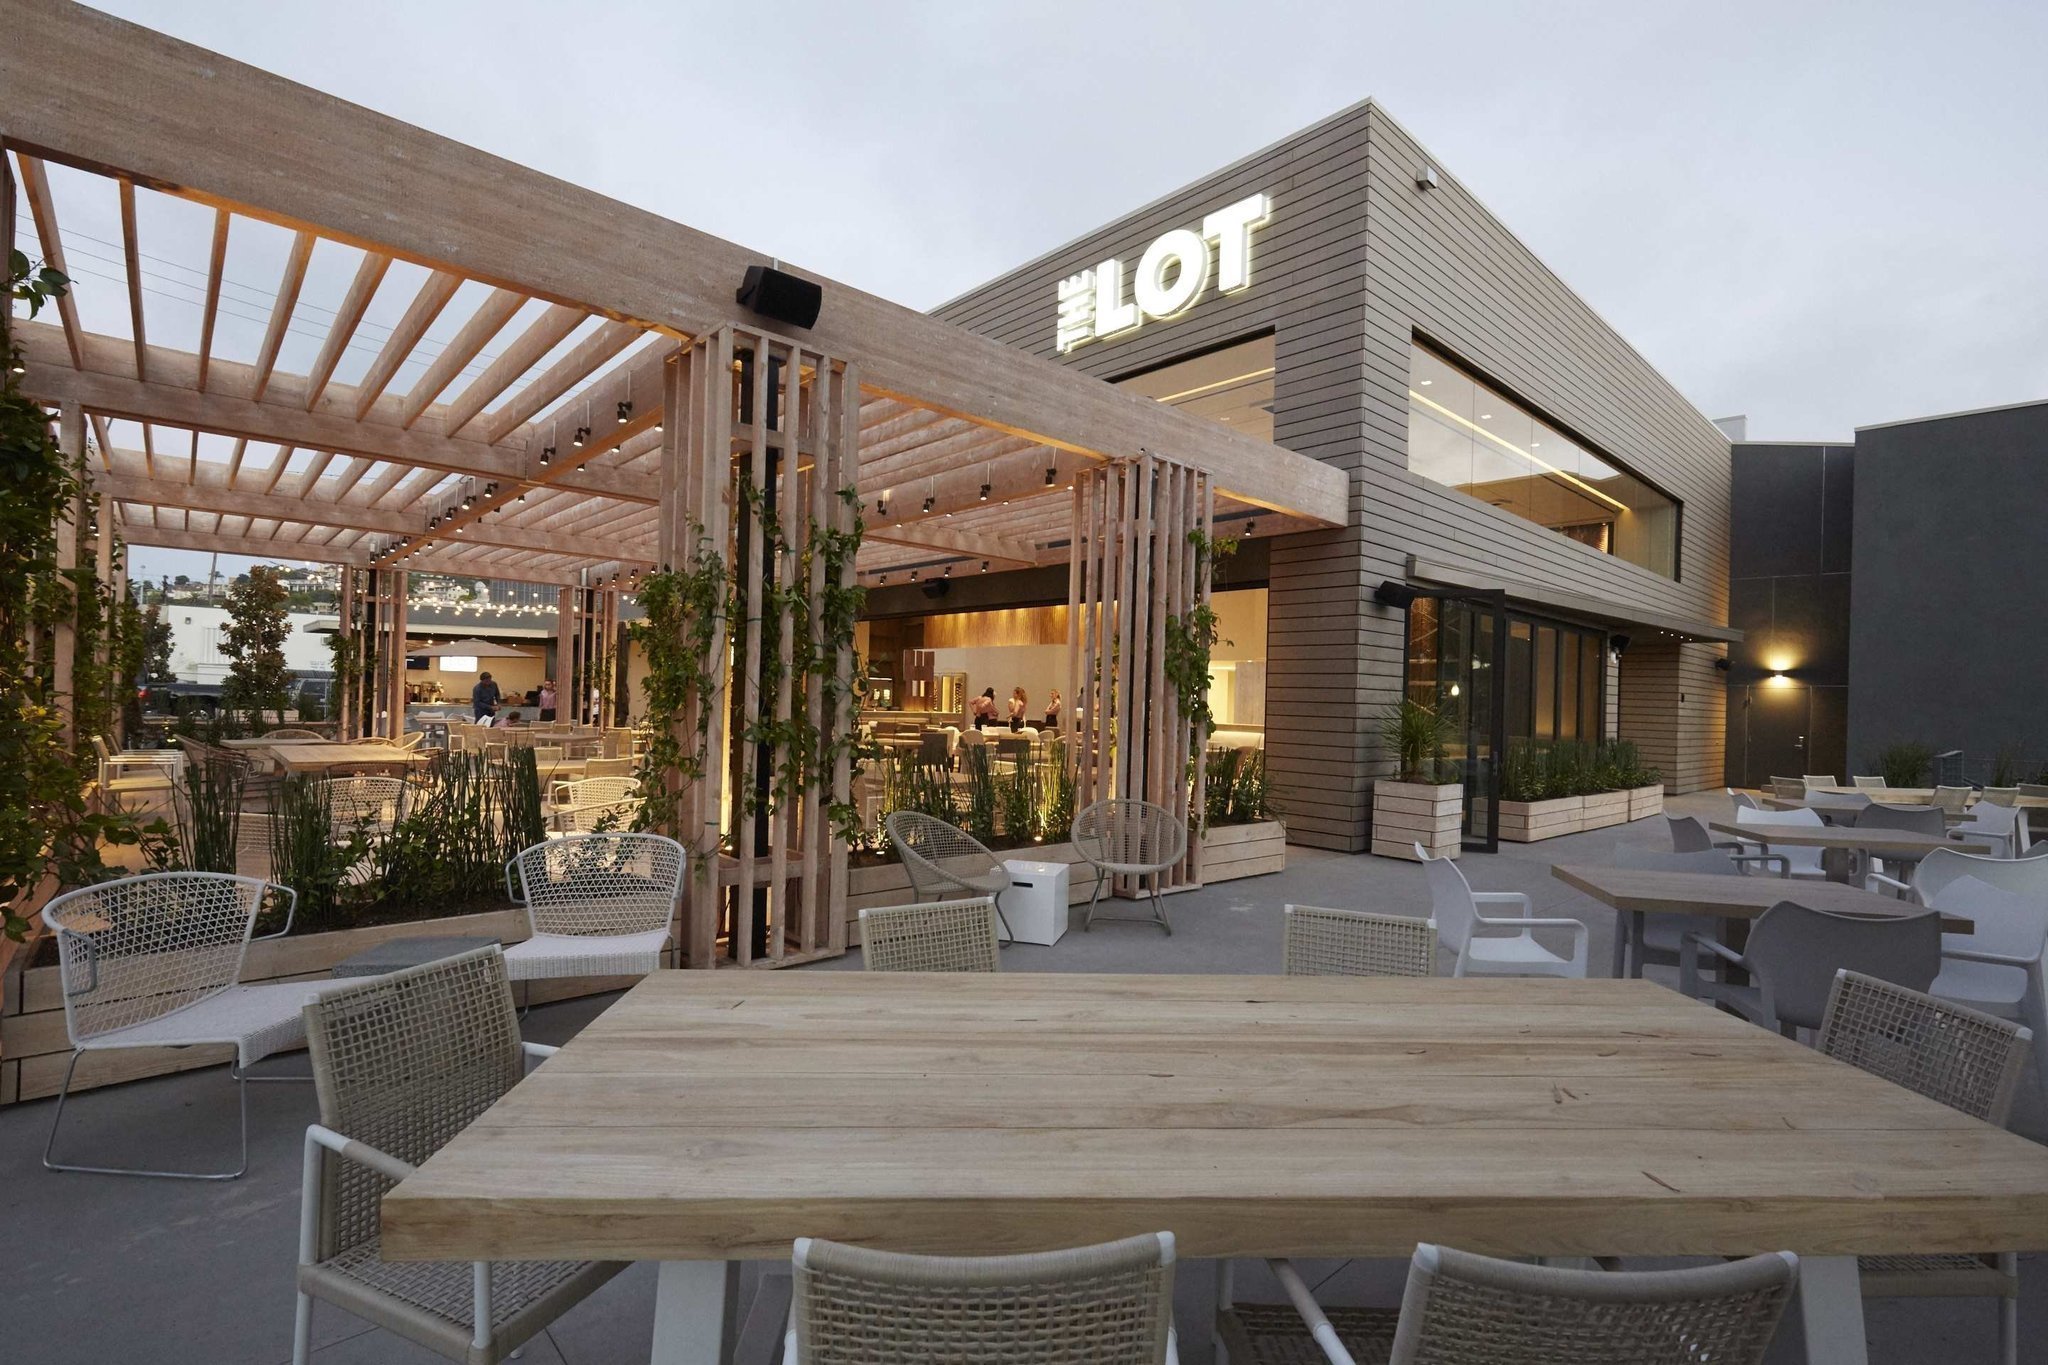 The Lot movie and dining complex replaces the former ...